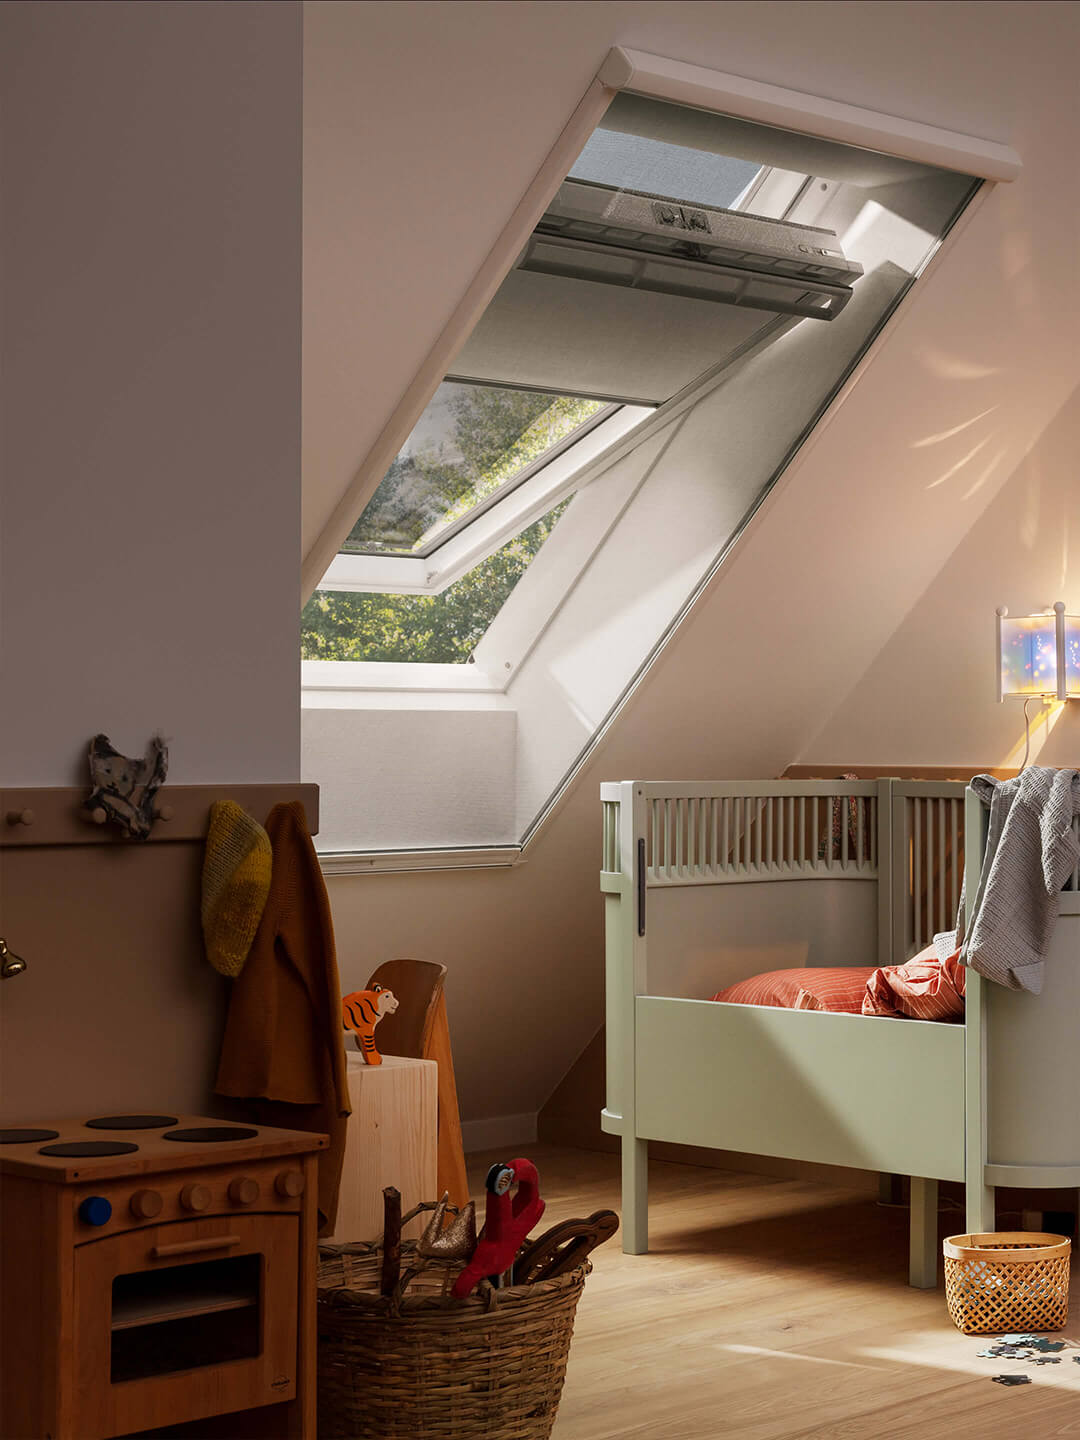 VELUX single standard roof window with blackout roller blinds viewed from a kids room